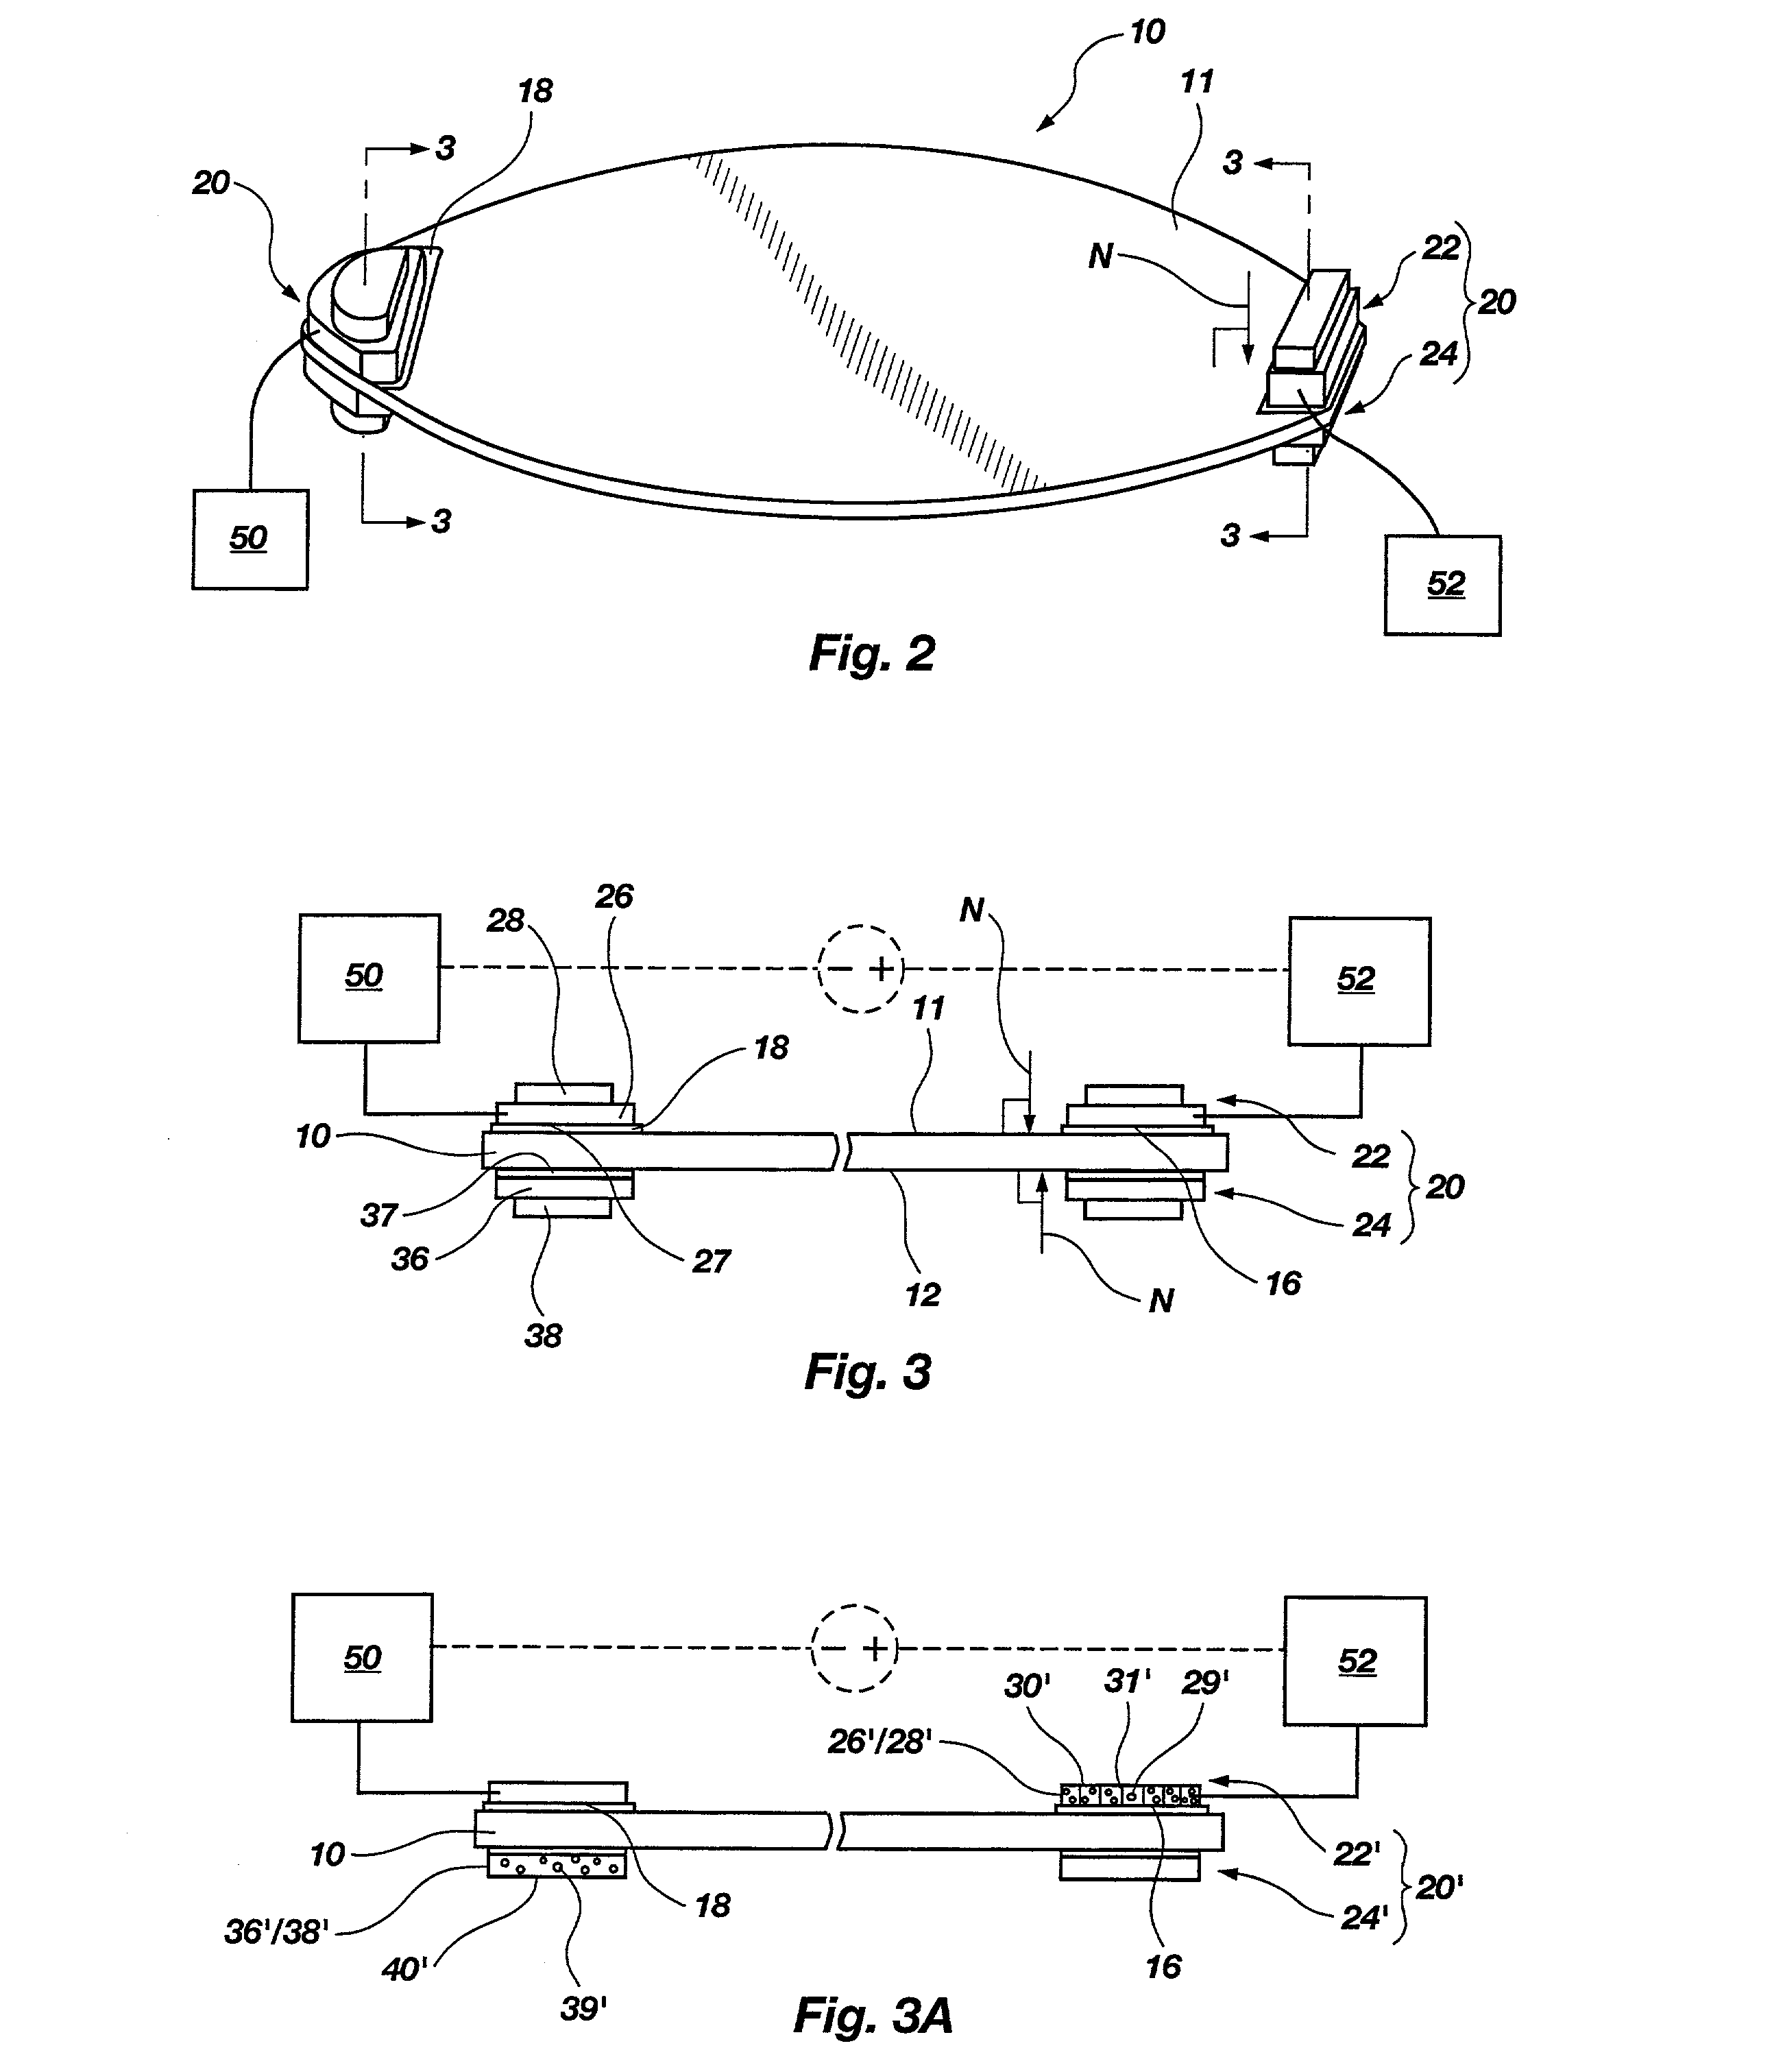 Methods for magnetically establishing an electrical connection with a contact of a semiconductor device component